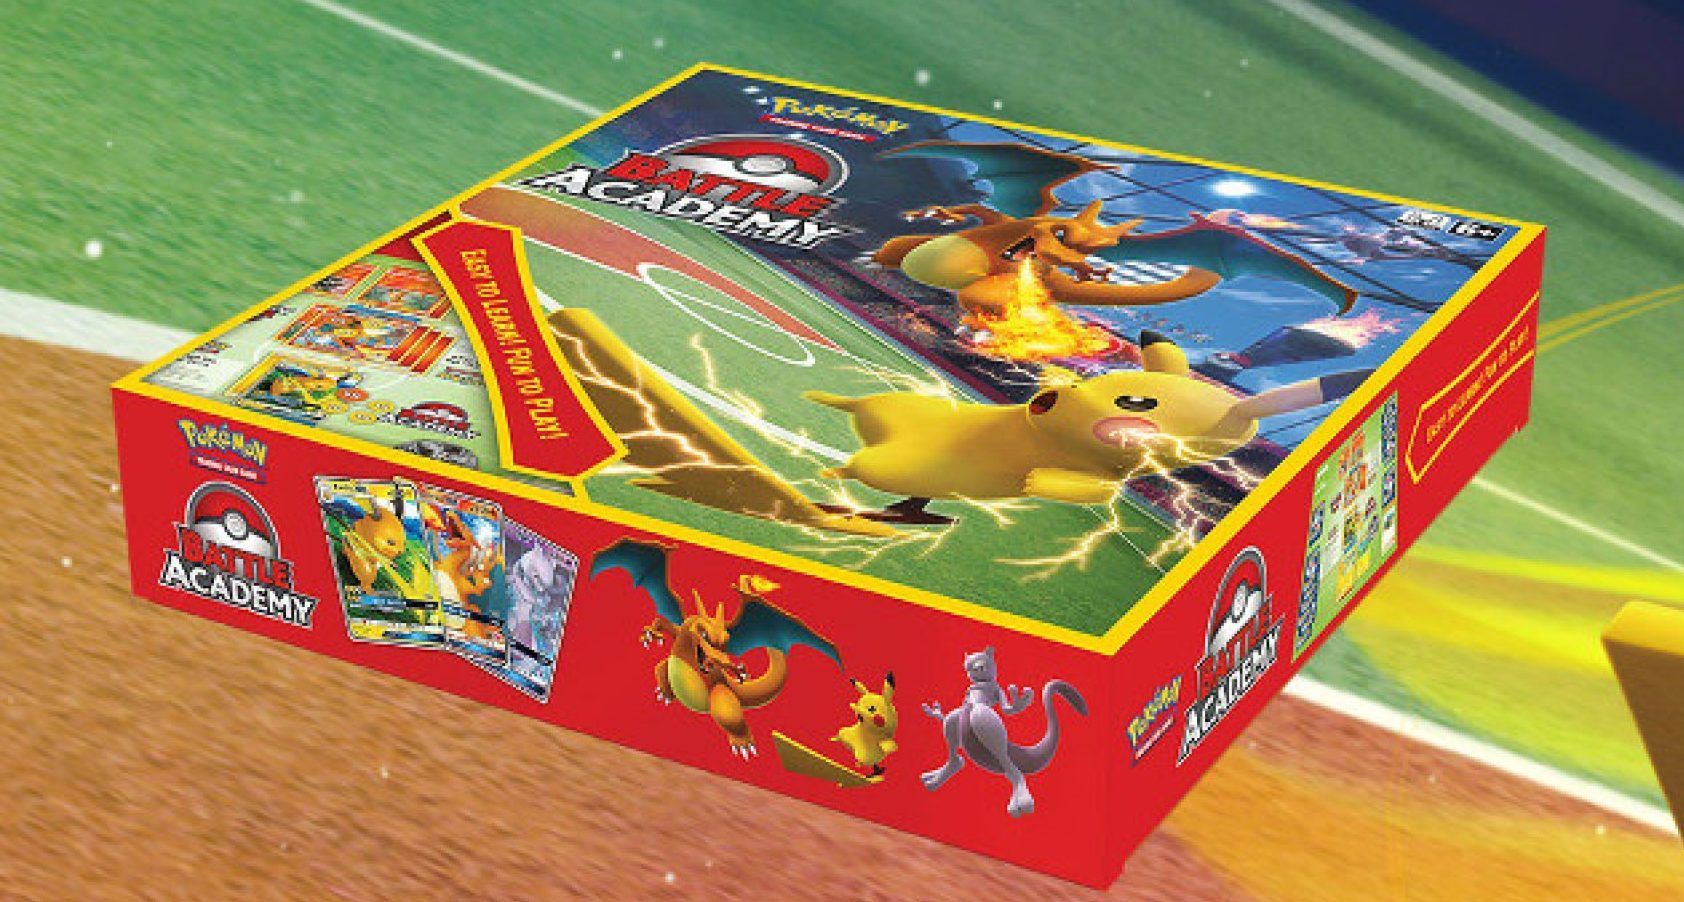 Part of a picture from Pokémon's battle academy board game advertising